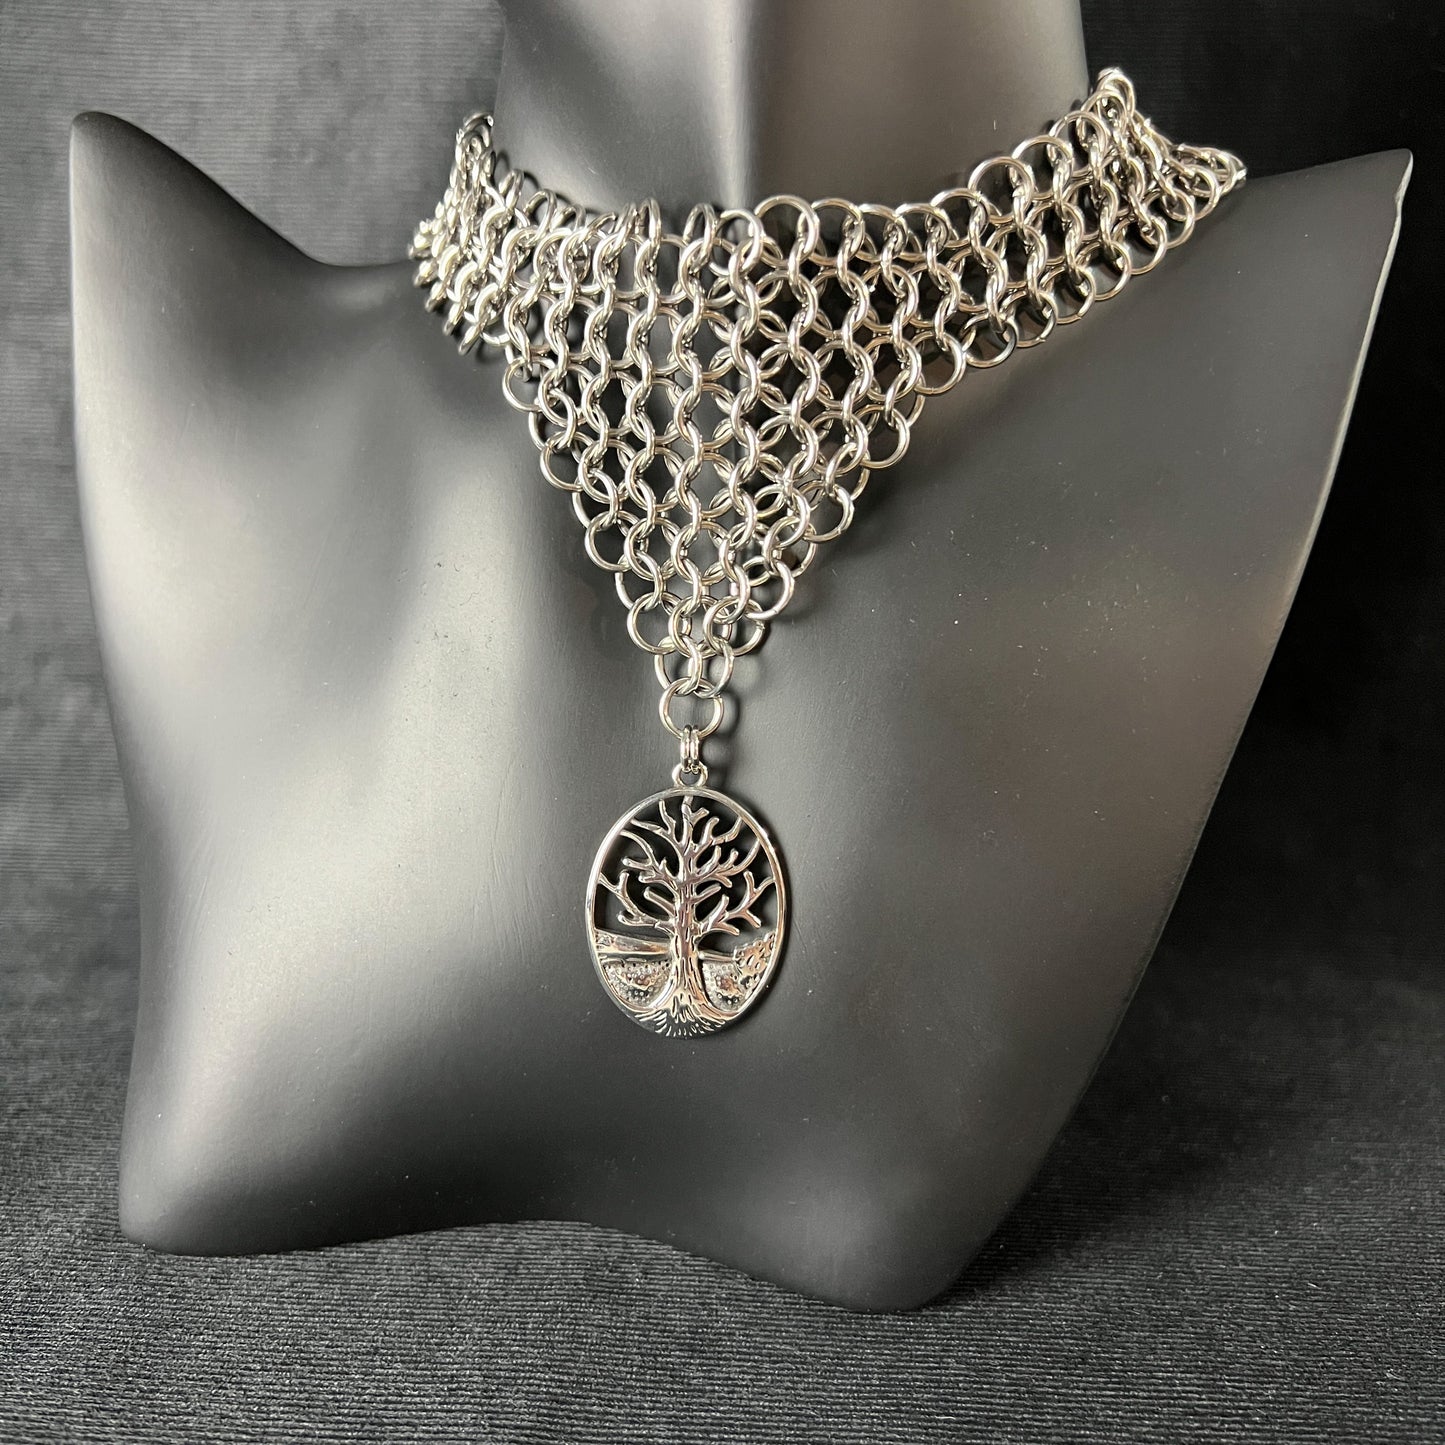 Tree pendant chainmail choker European 4 in 1 stainless steel necklace Baguette Magick